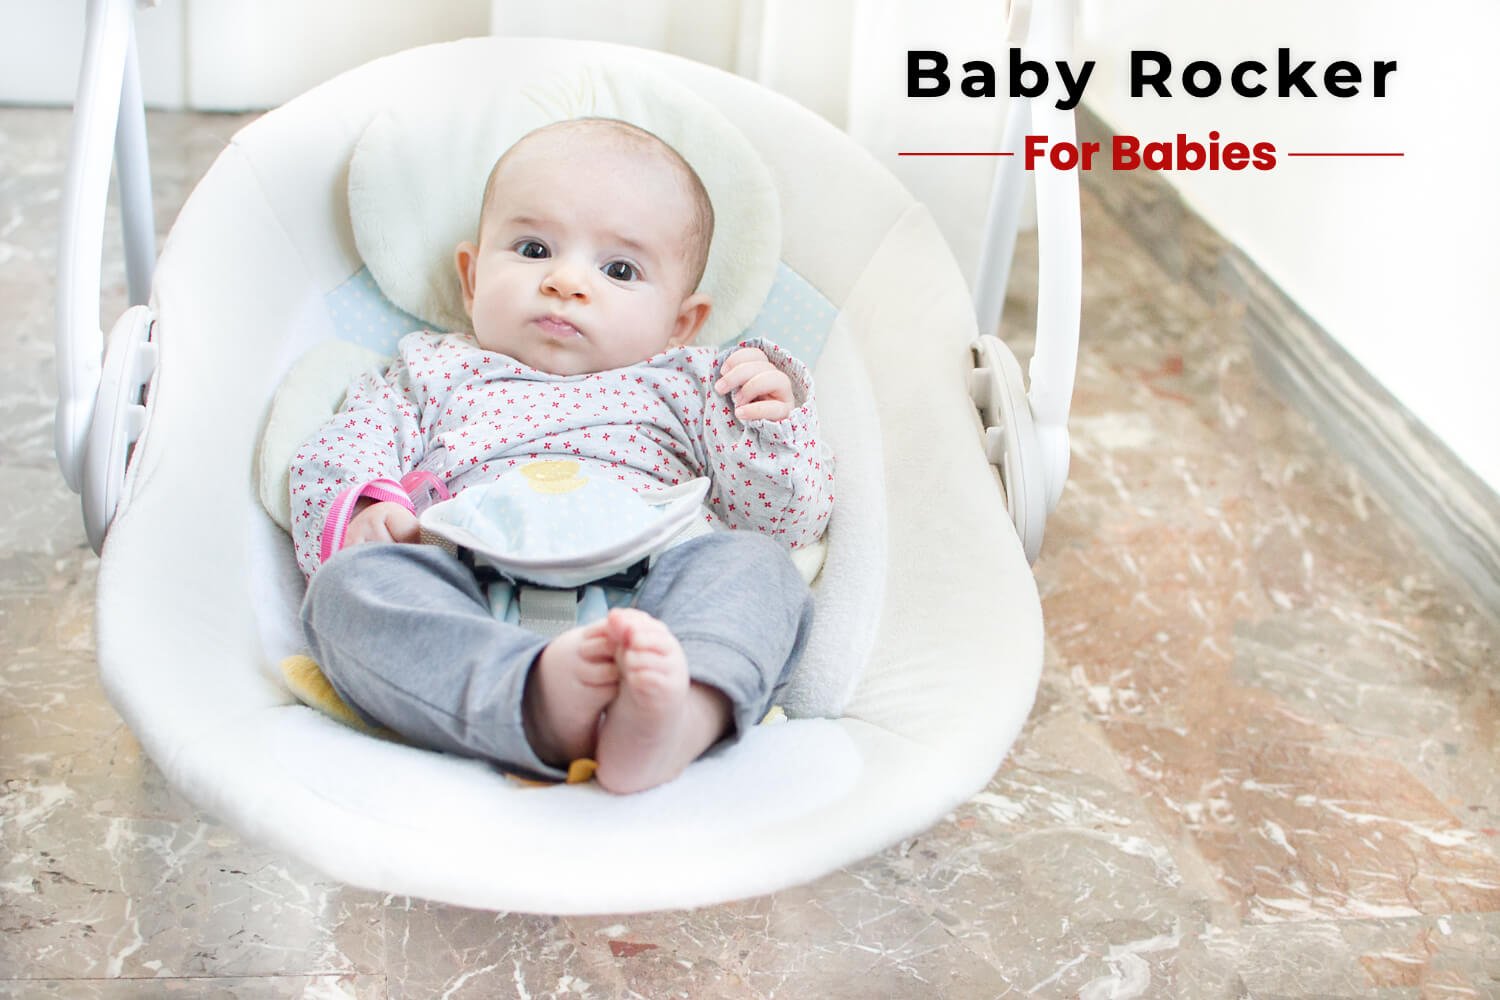 How to Choose the Right Baby Rocker For Your Baby?